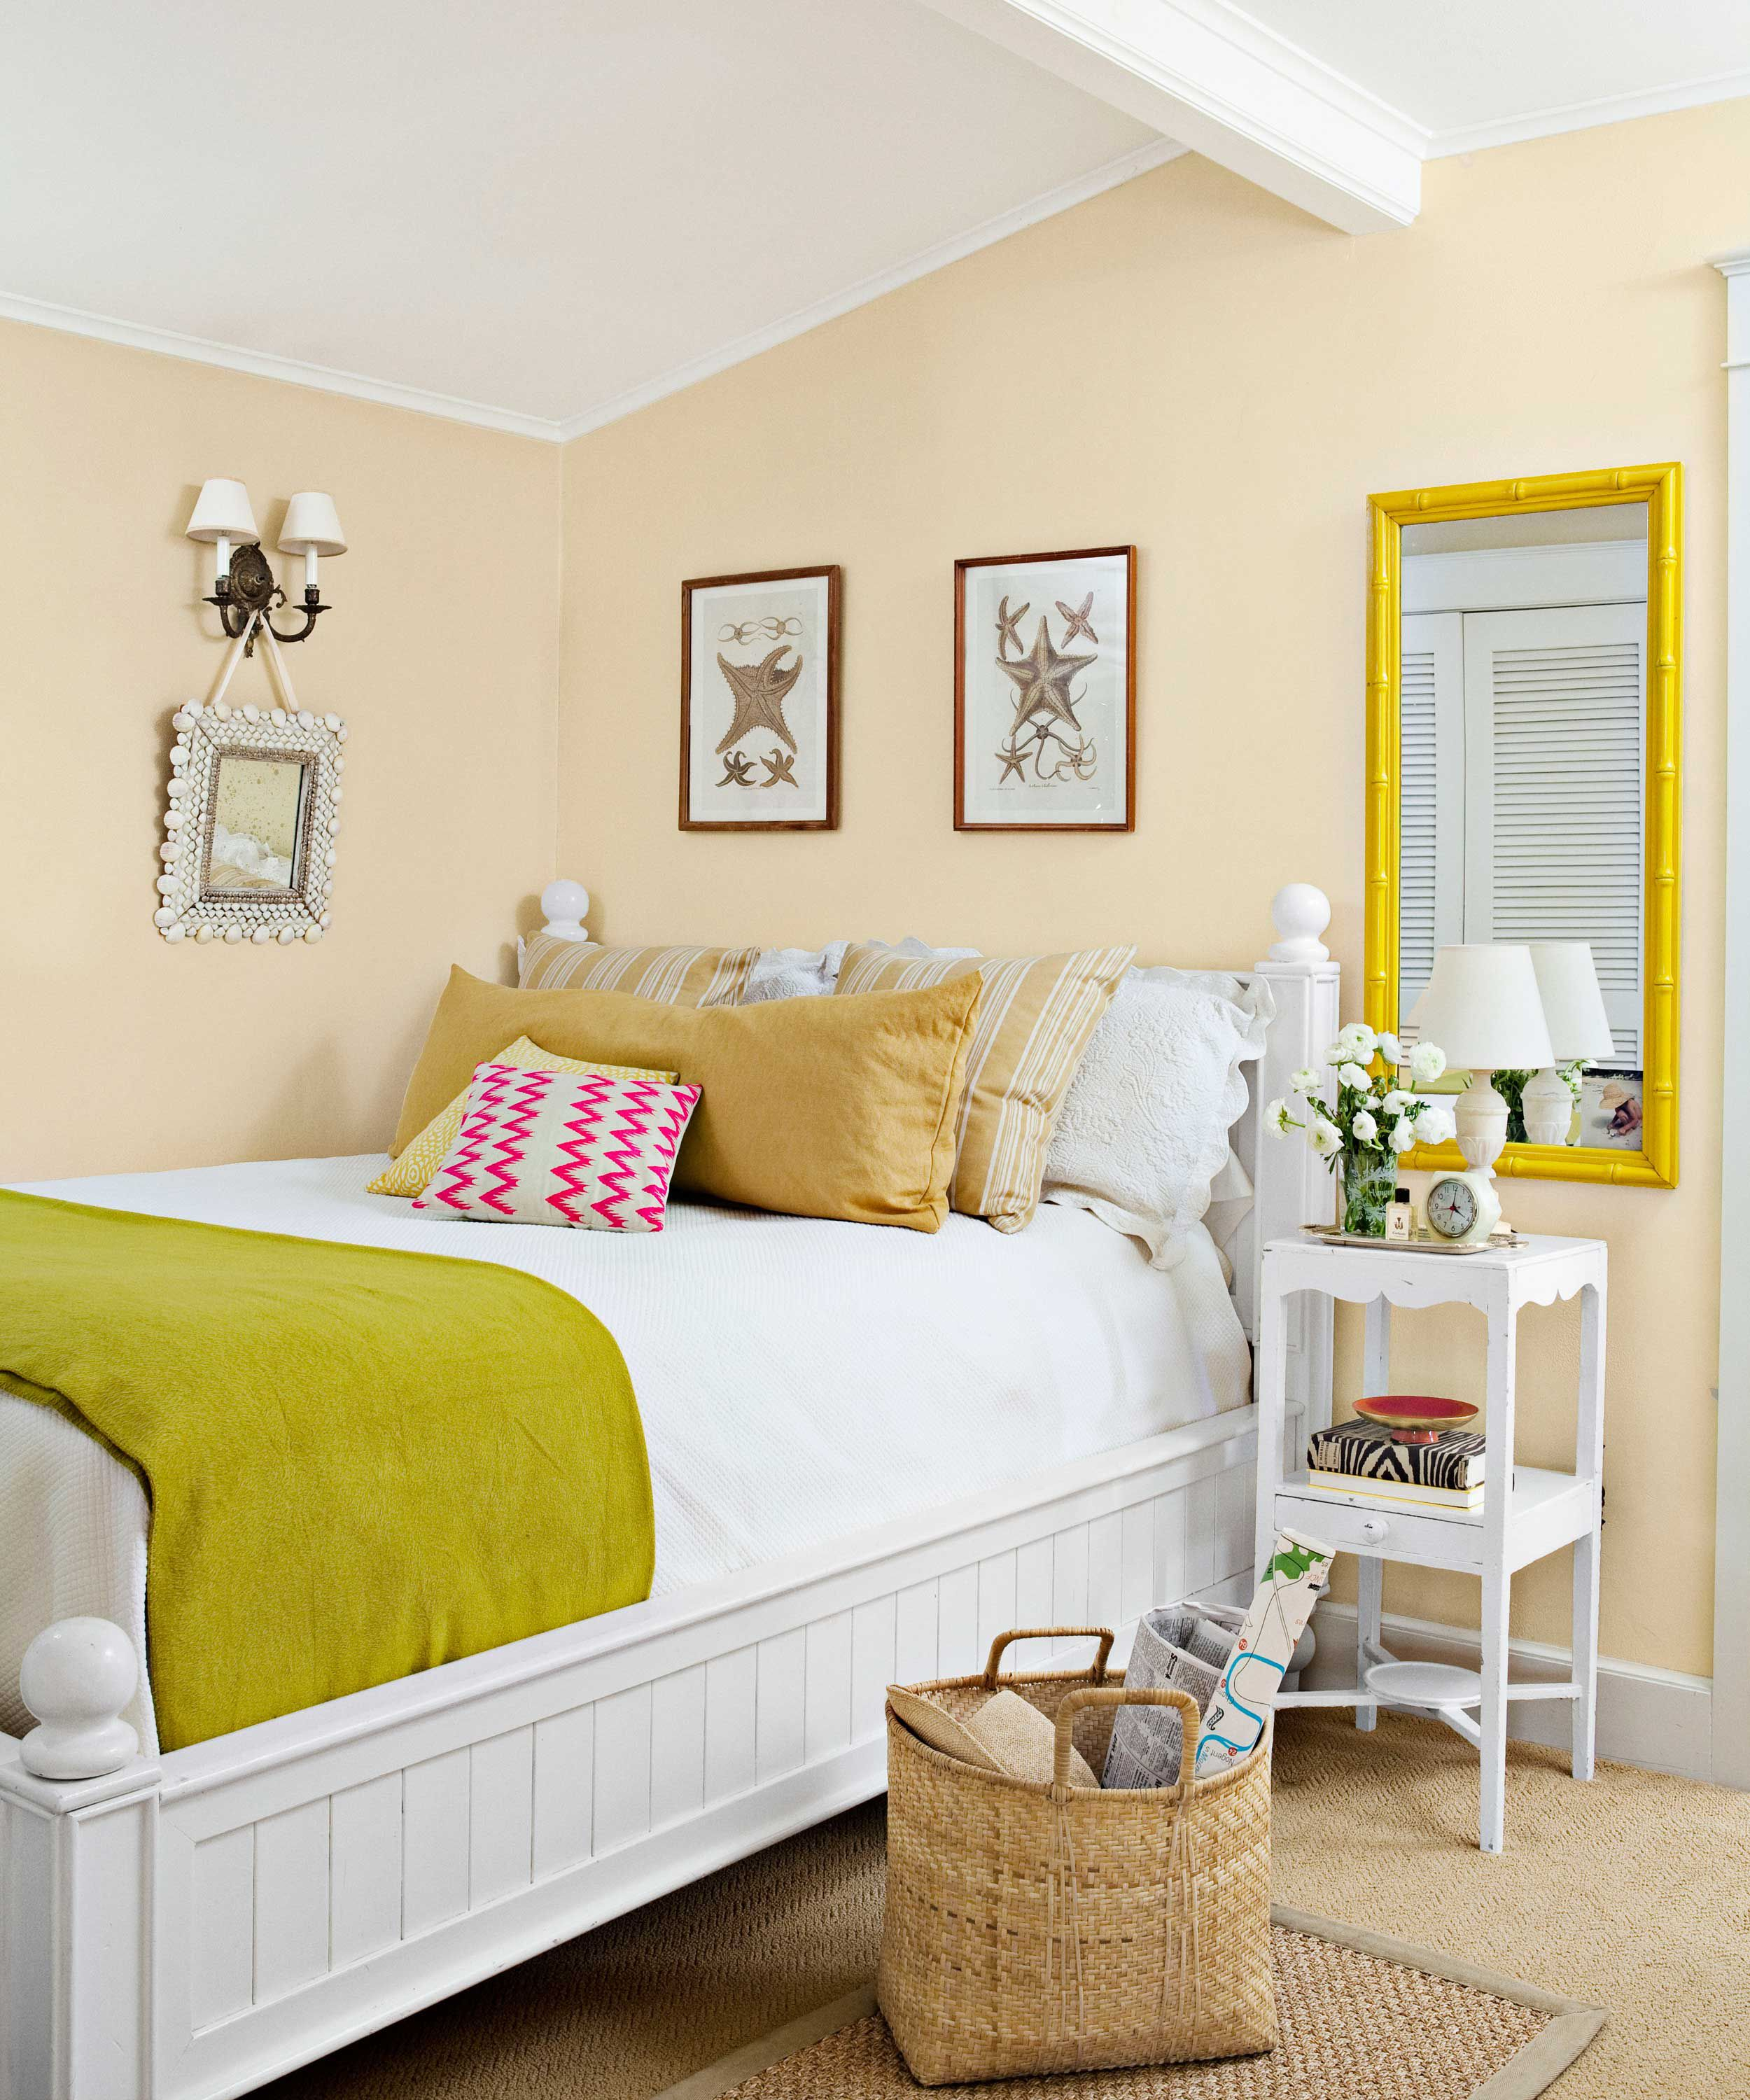 15 Best Paint Colors For Small Rooms Painting Small Rooms intended for sizing 2500 X 3000